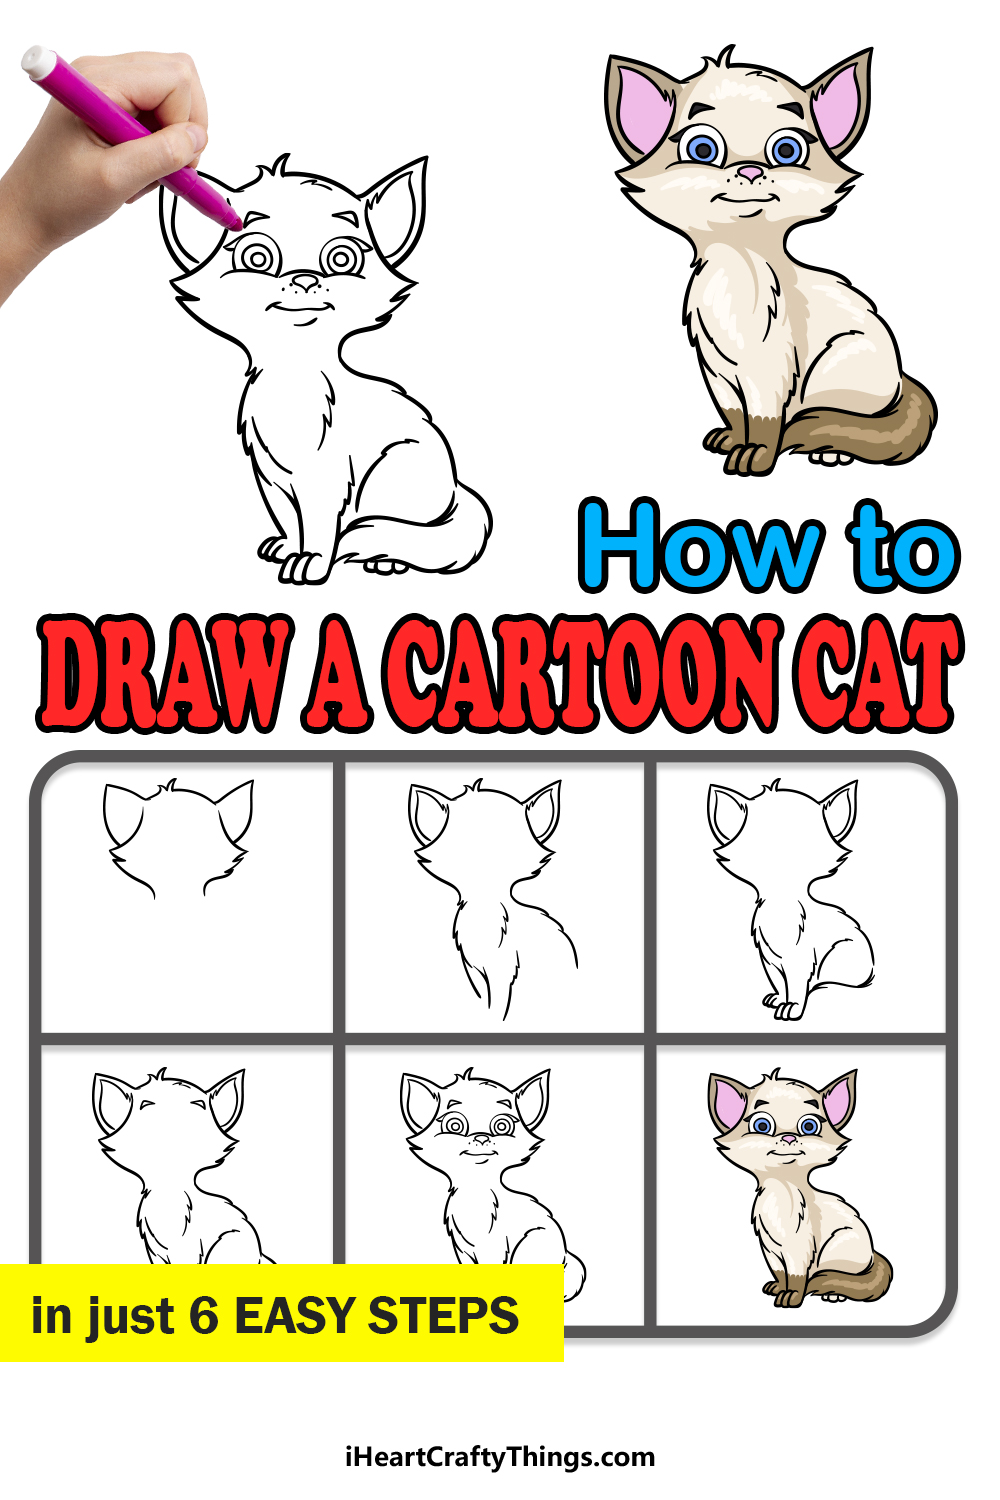 how to draw a Cartoon Cat in 6 easy steps